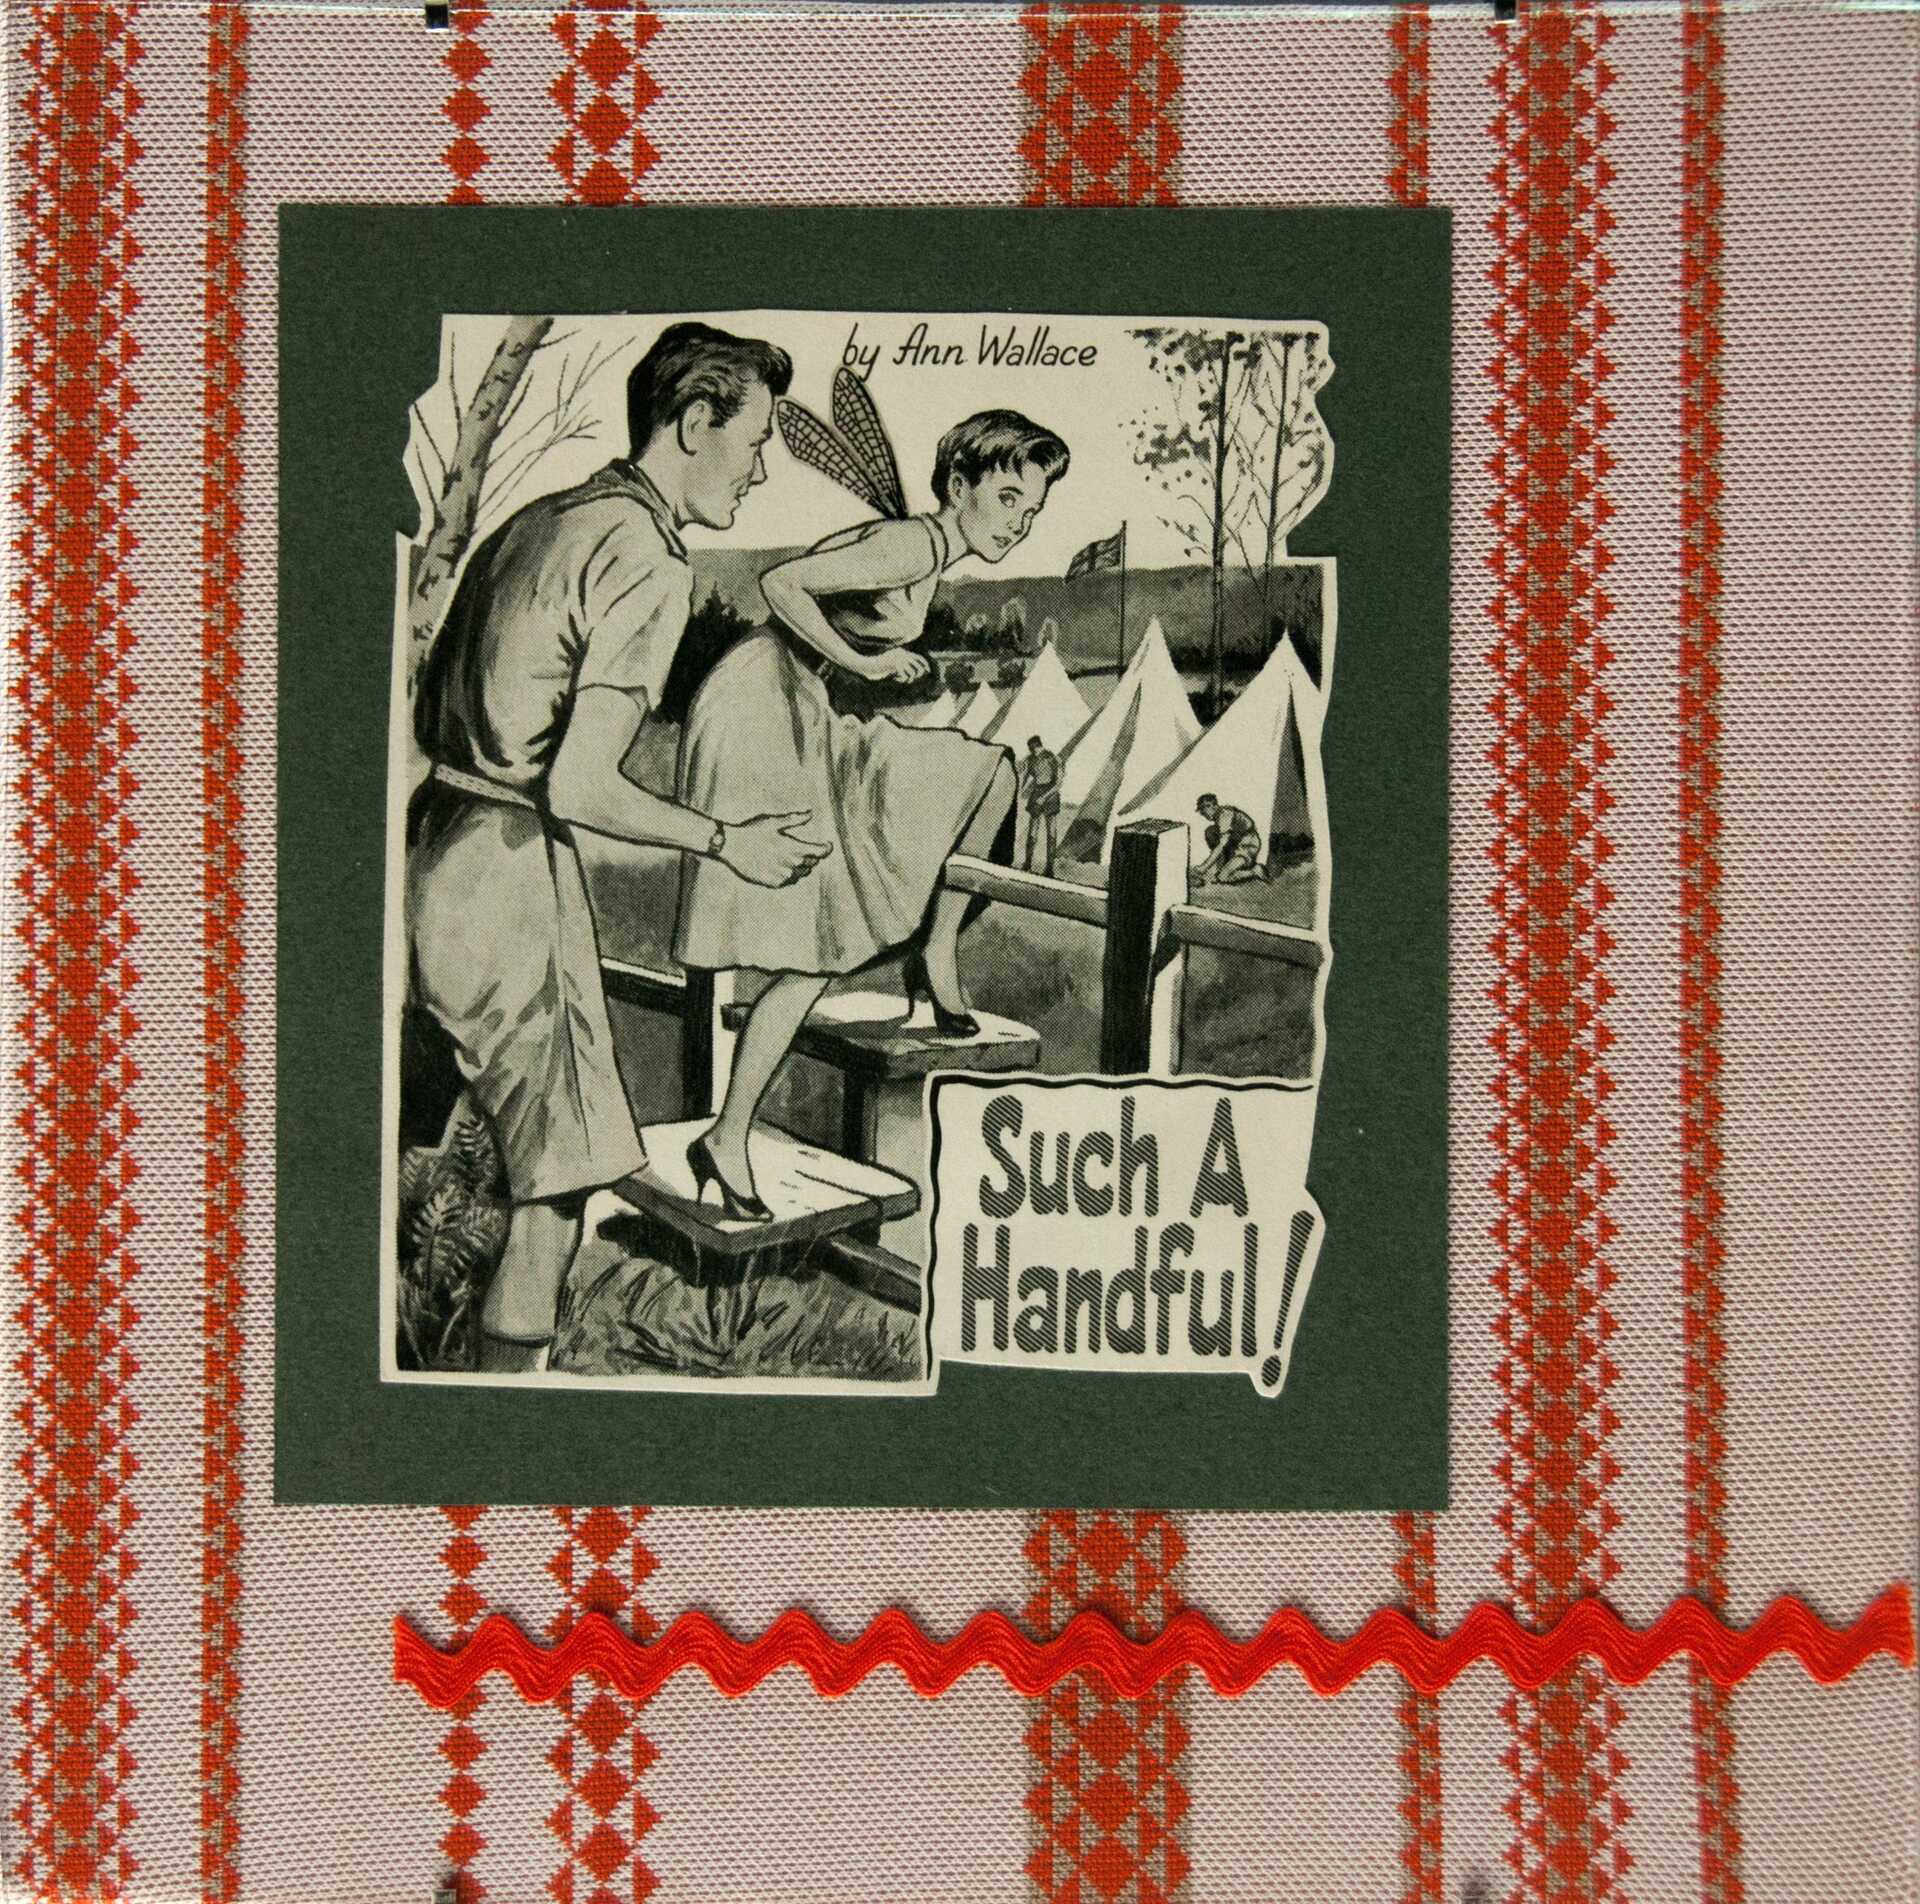 "Such a Handful" by Libby Bloxham. A vintage book illustration is layered over charcoal card and salmon and red striped vintage fabric, to create a square collage. The illustration depicts a young woman climbing over a fence into a field of men setting up tents, with the UK flag flying in the background, looking back at a man who seems to be speaking with her. The printed title is 'Such a Handful! by Ann Wallace'. Acetate insect wings have been added the woman.